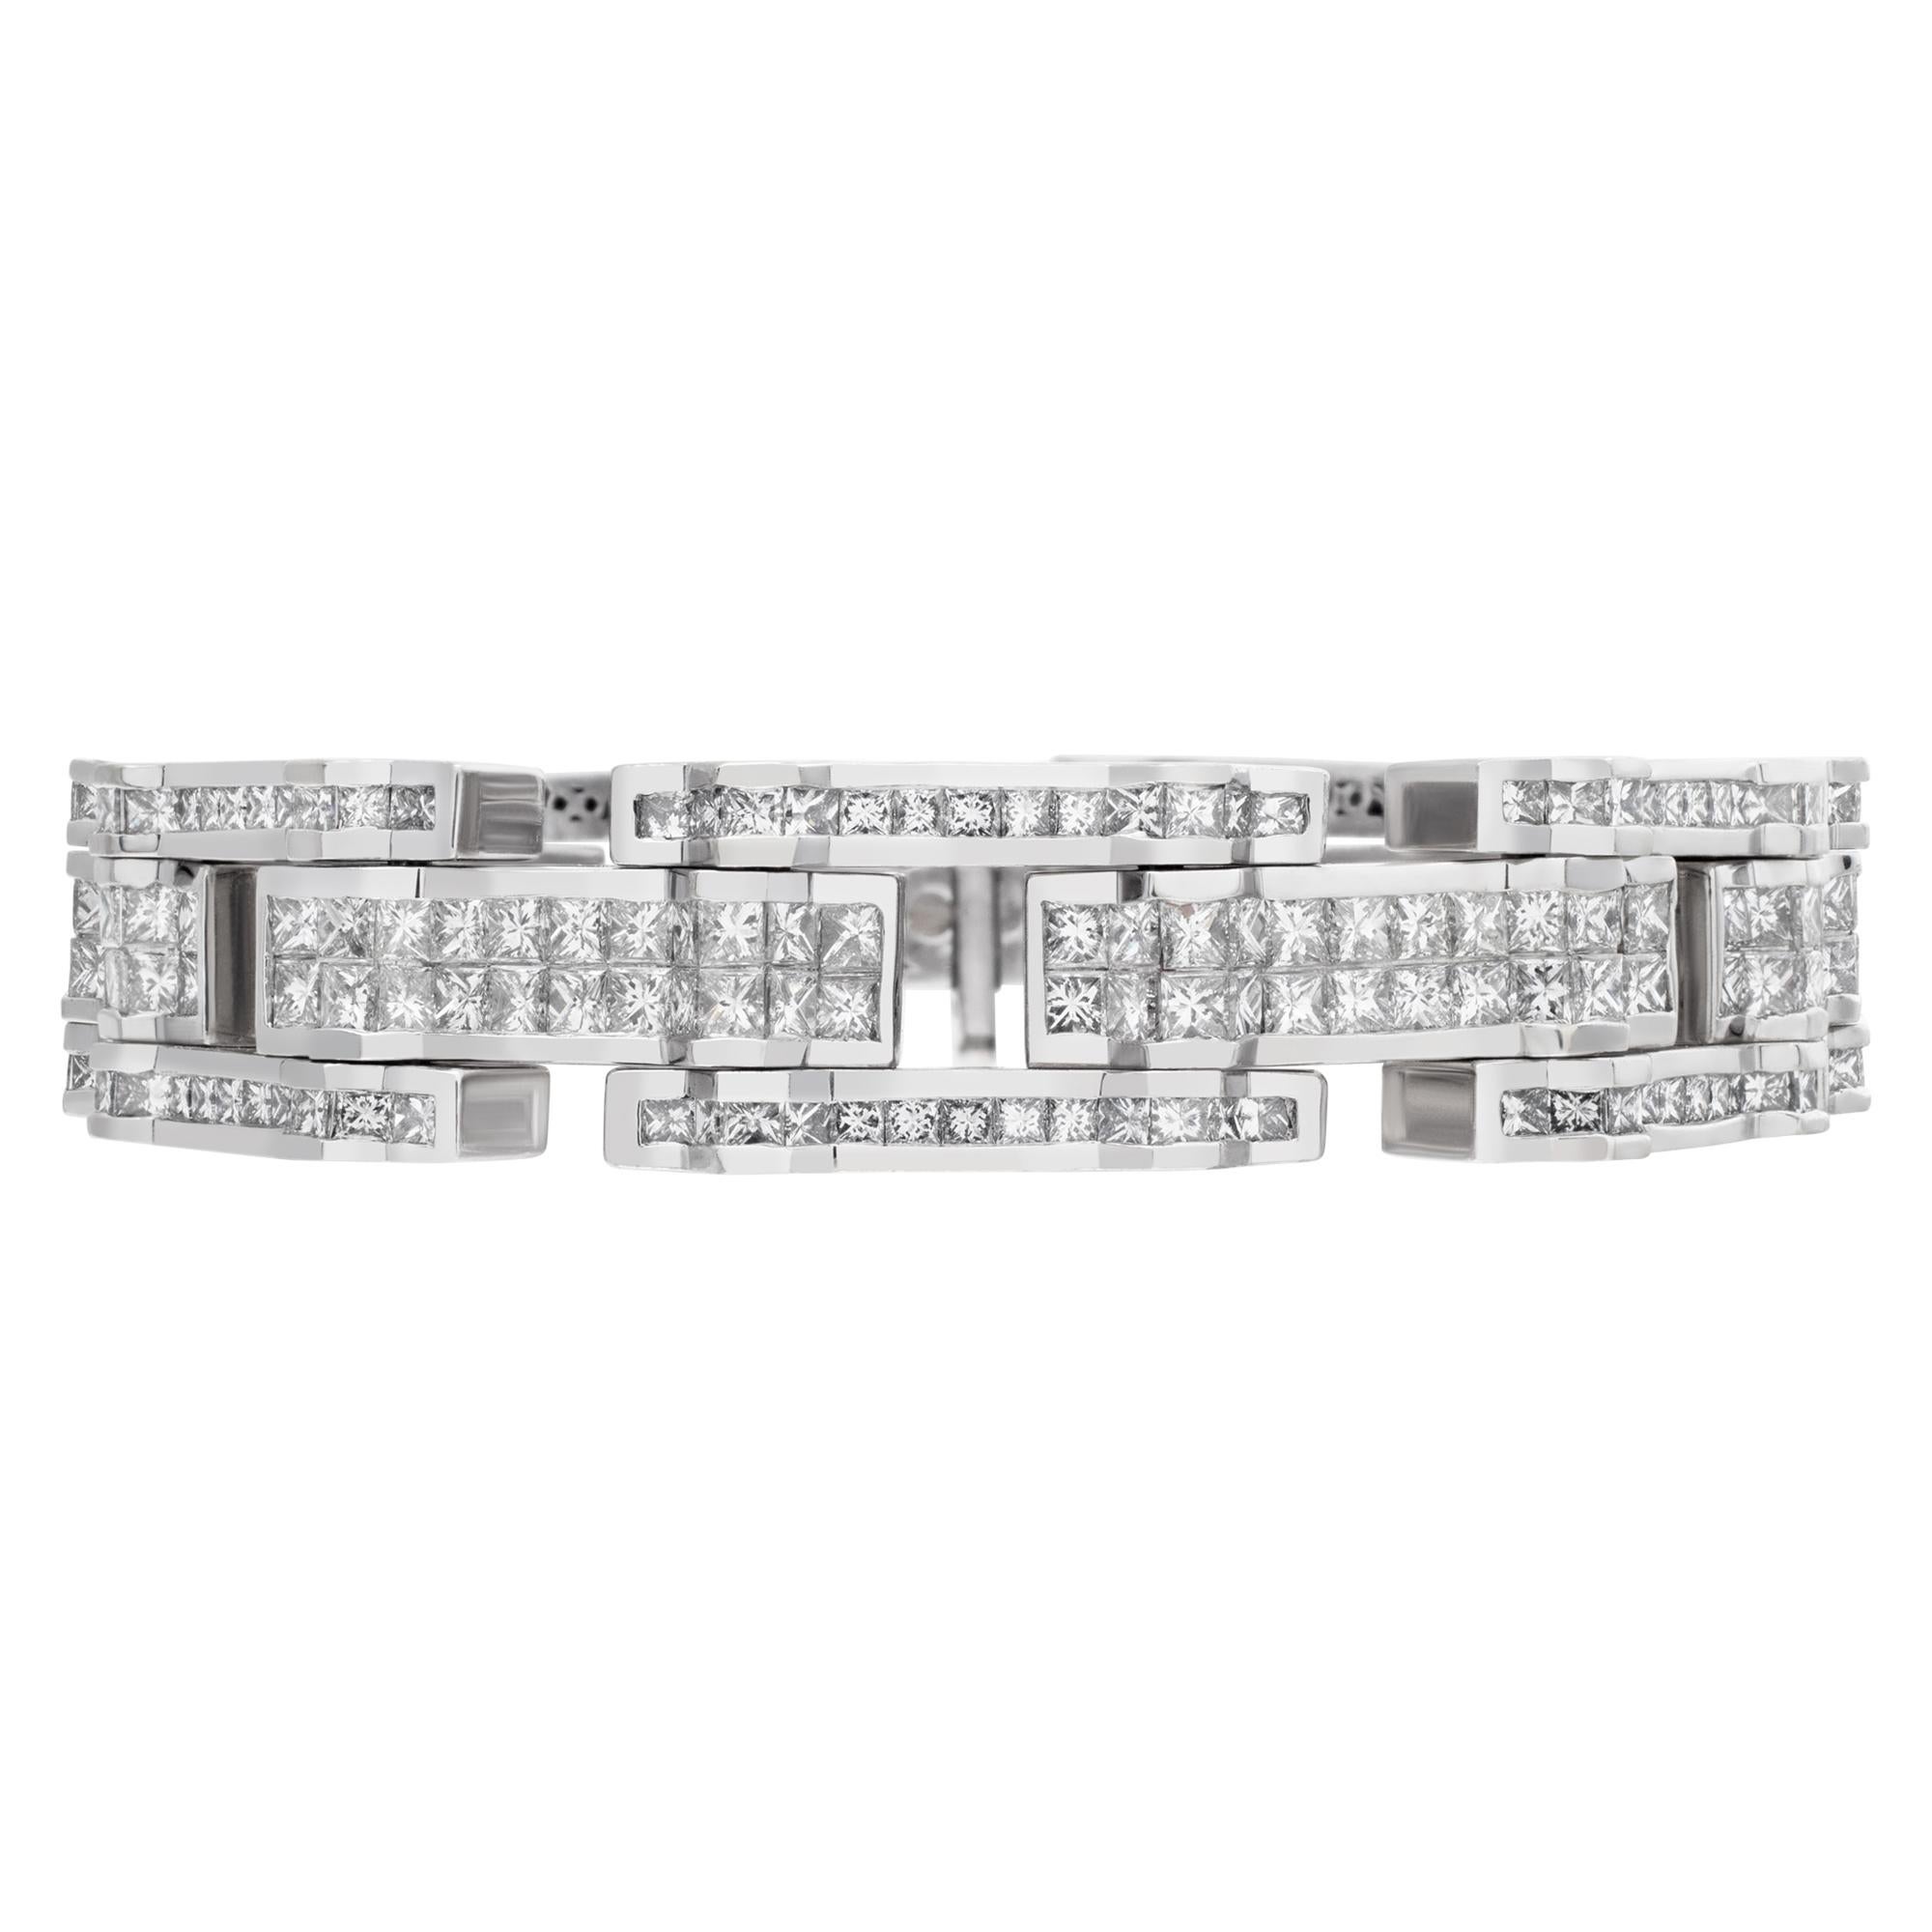 Heavy and bright bracelet in channel and invisibly set princess cut G-H color, VS-SI clarity diamonds on 18k white gold bracelet. Measures 7.75 inches.